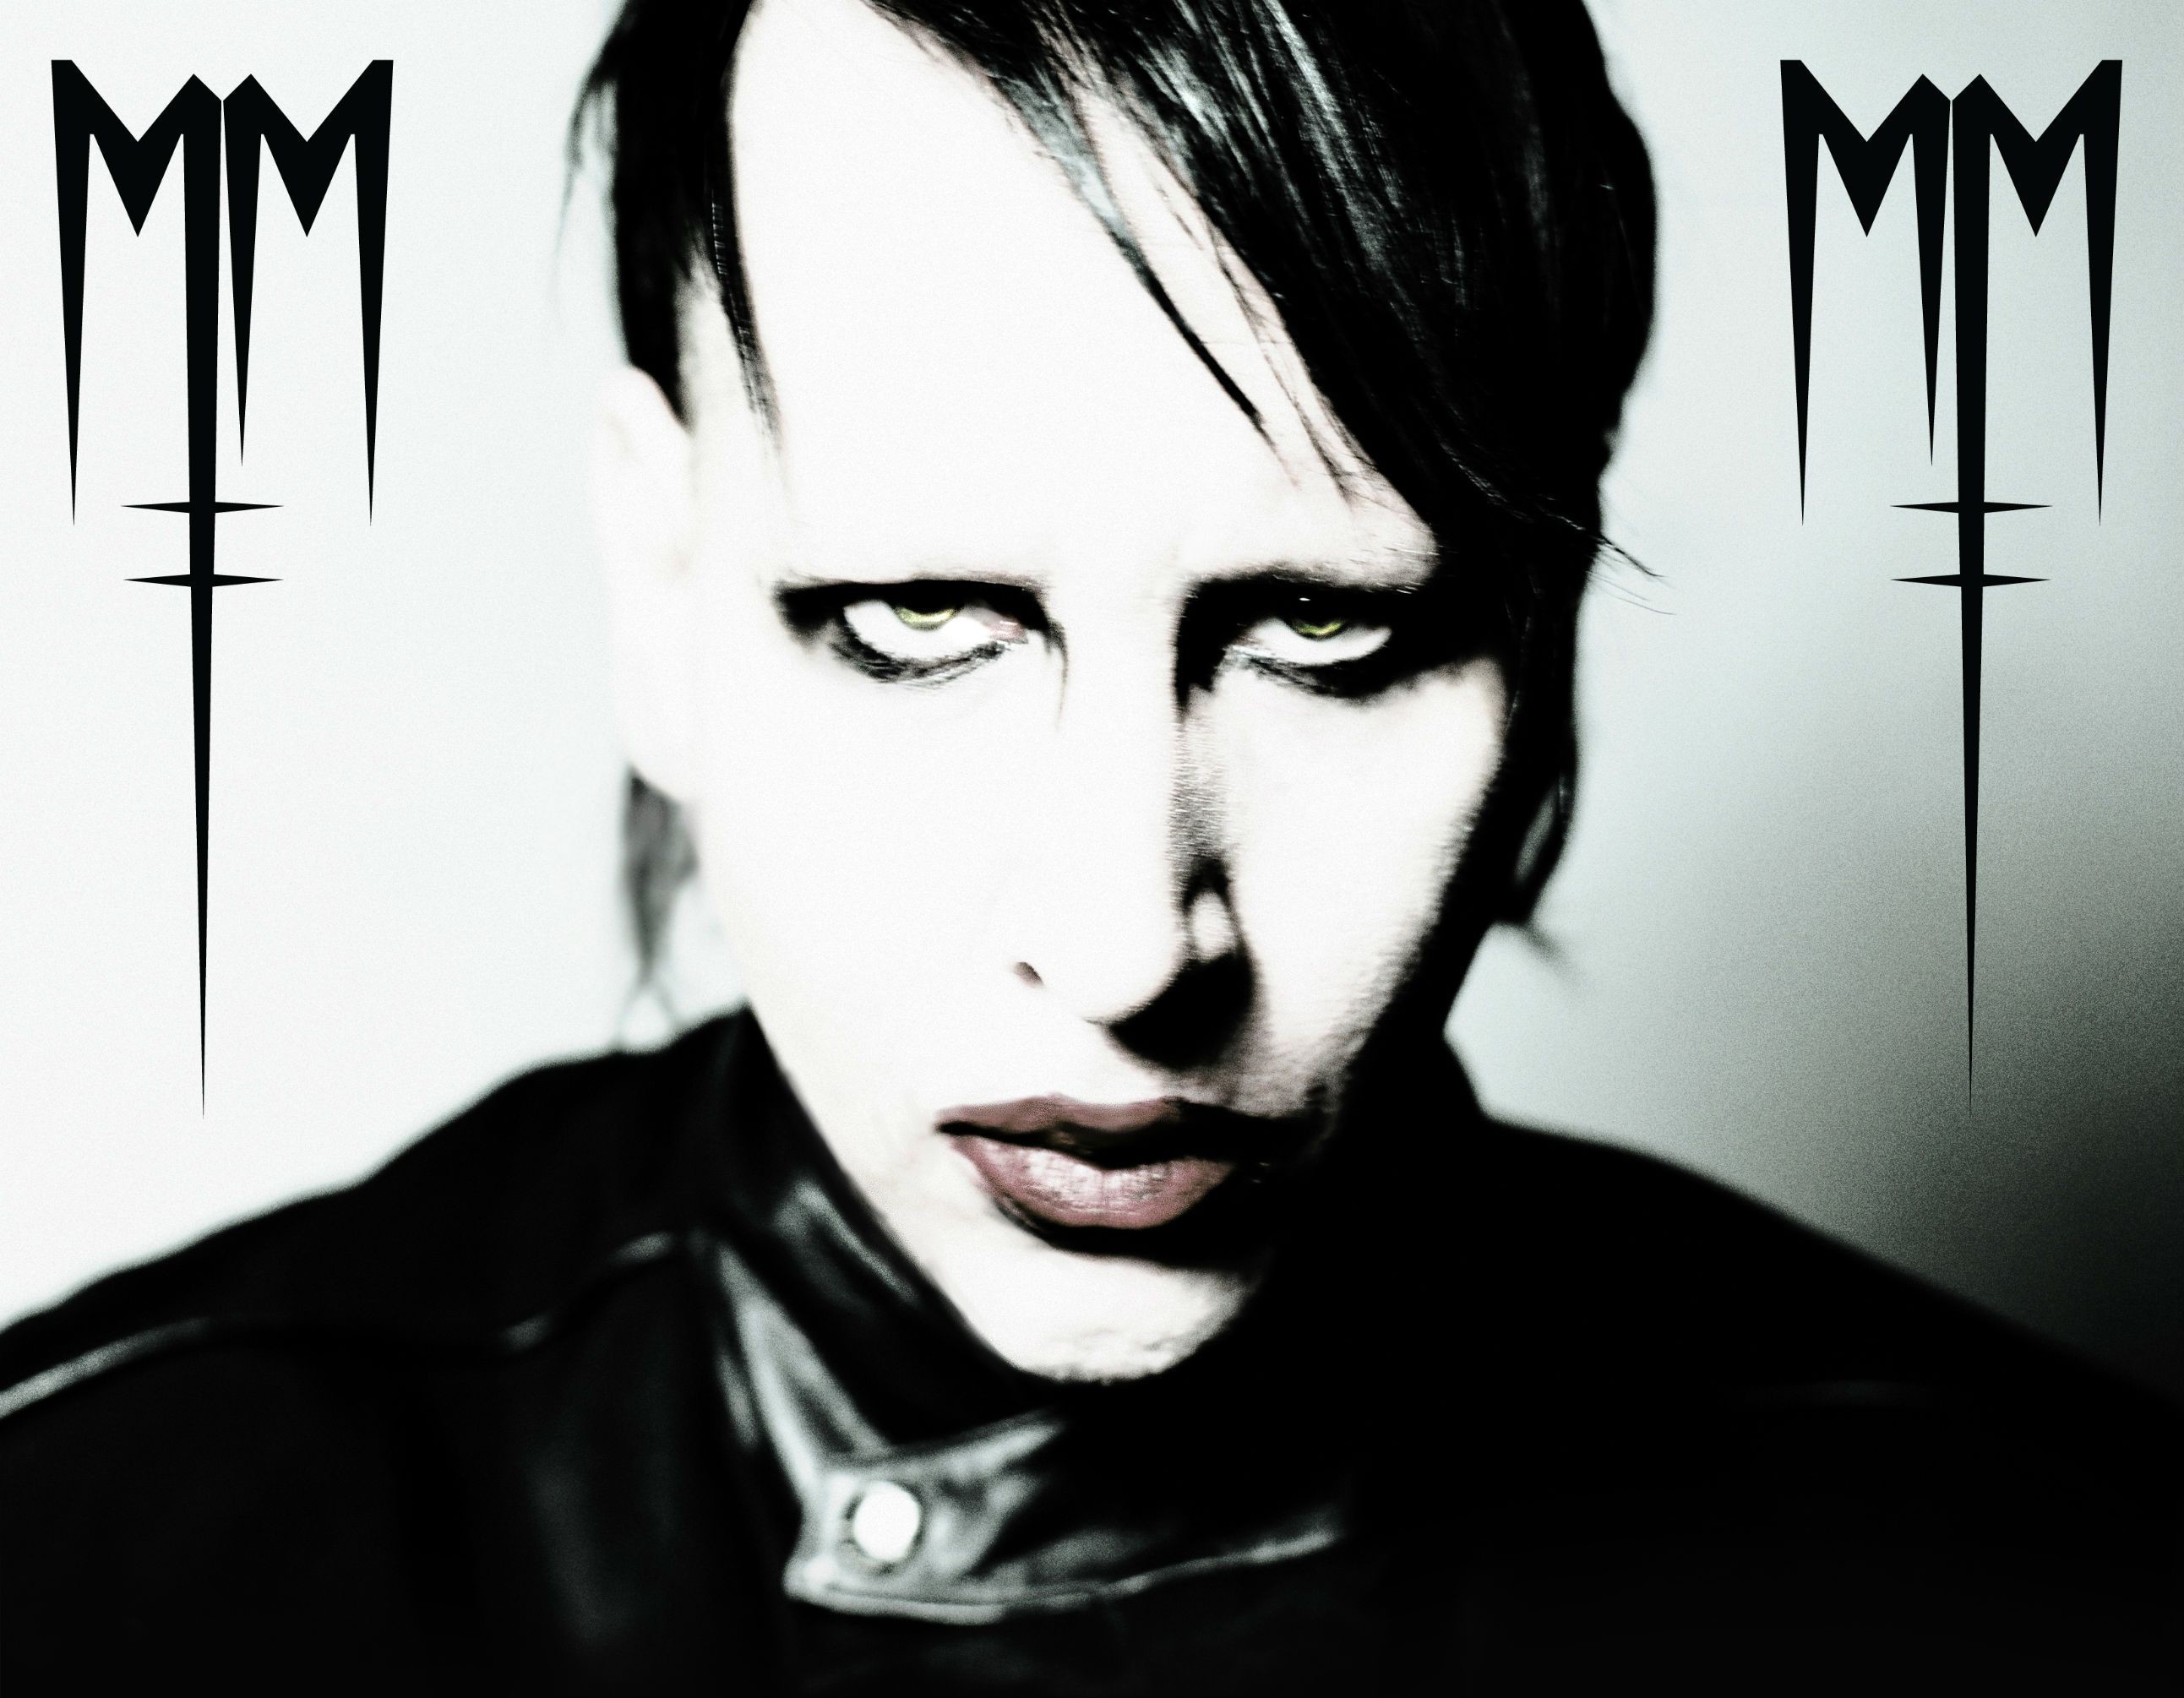 2585x2010 Marilyn Manson Wallpapers - Wallpaper Cave